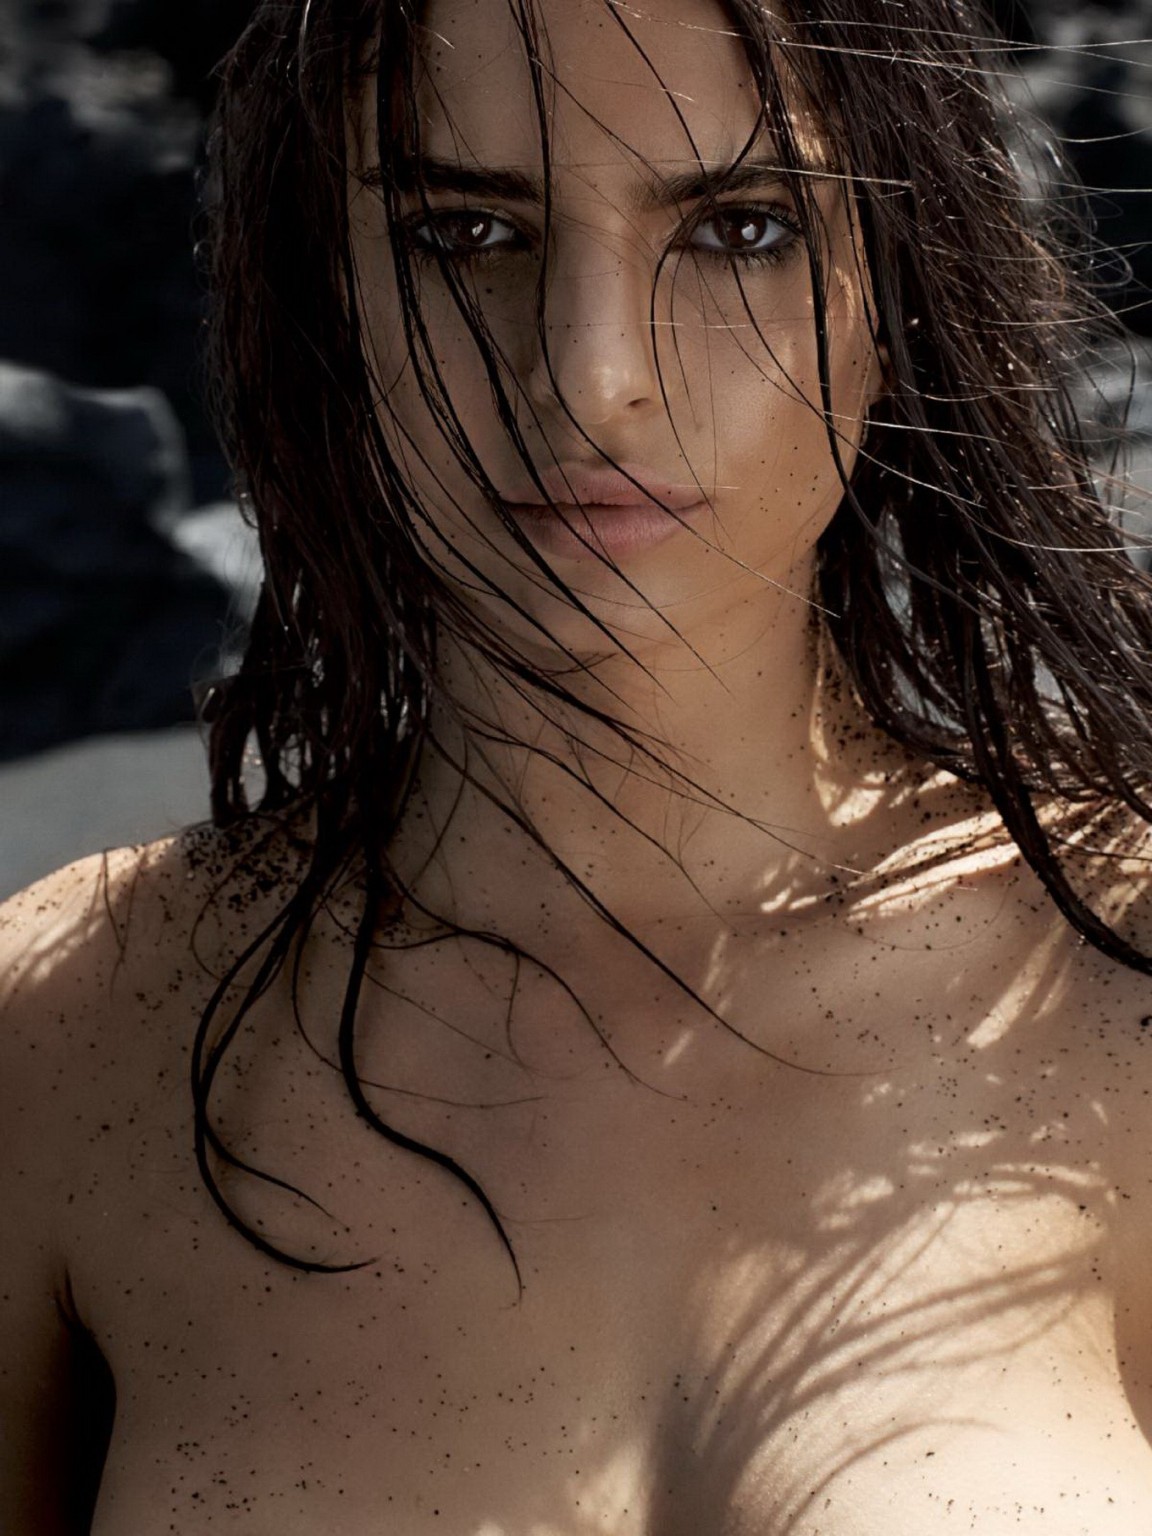 Emily Ratajkowski naked and dirty on the beach for GQ Magazine July 2014 issue #75190532